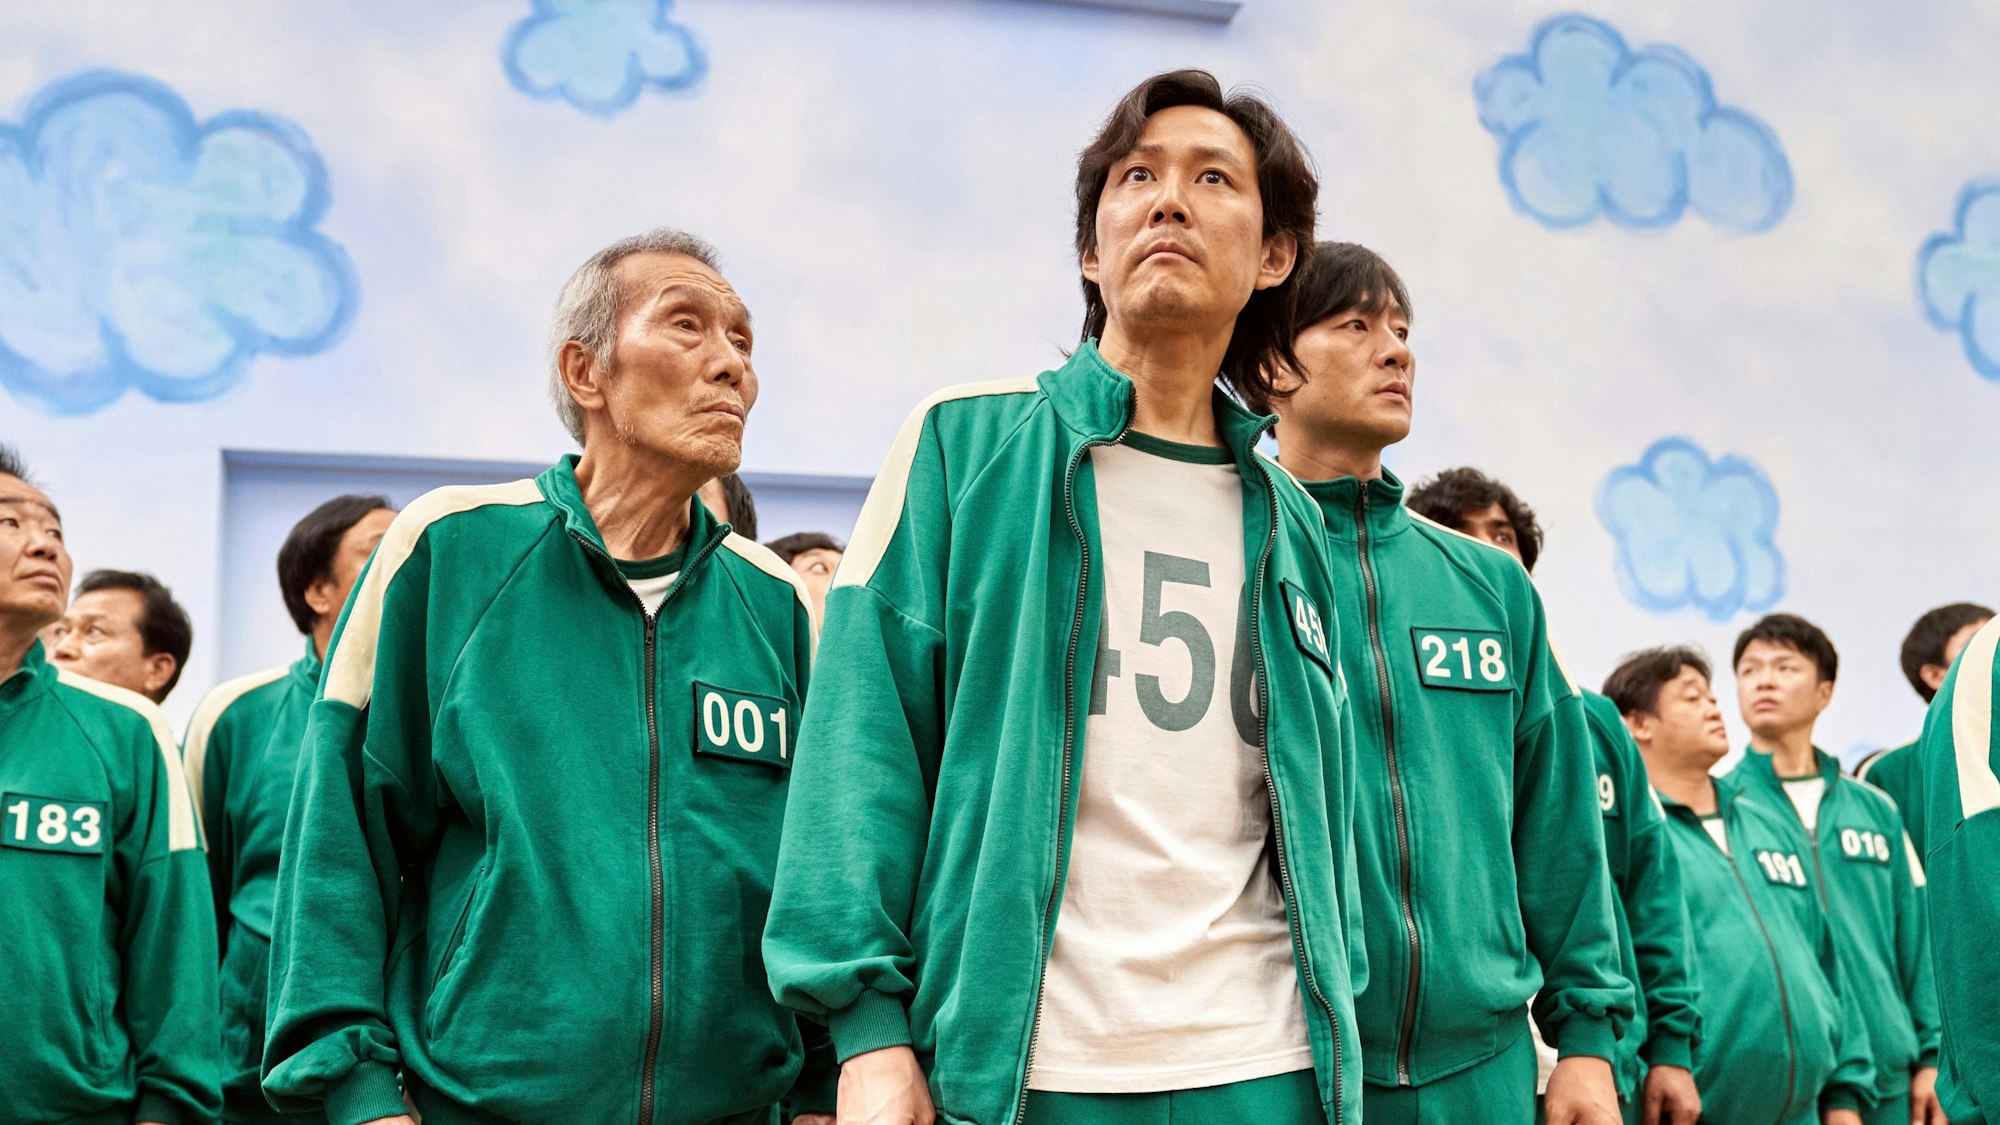 This image released by Netflix shows Lee Jung-jae, center, Park Hae-soo, right, and Oh Young-soo in a scene from the Korean series "Squid Game." (Netflix via AP)